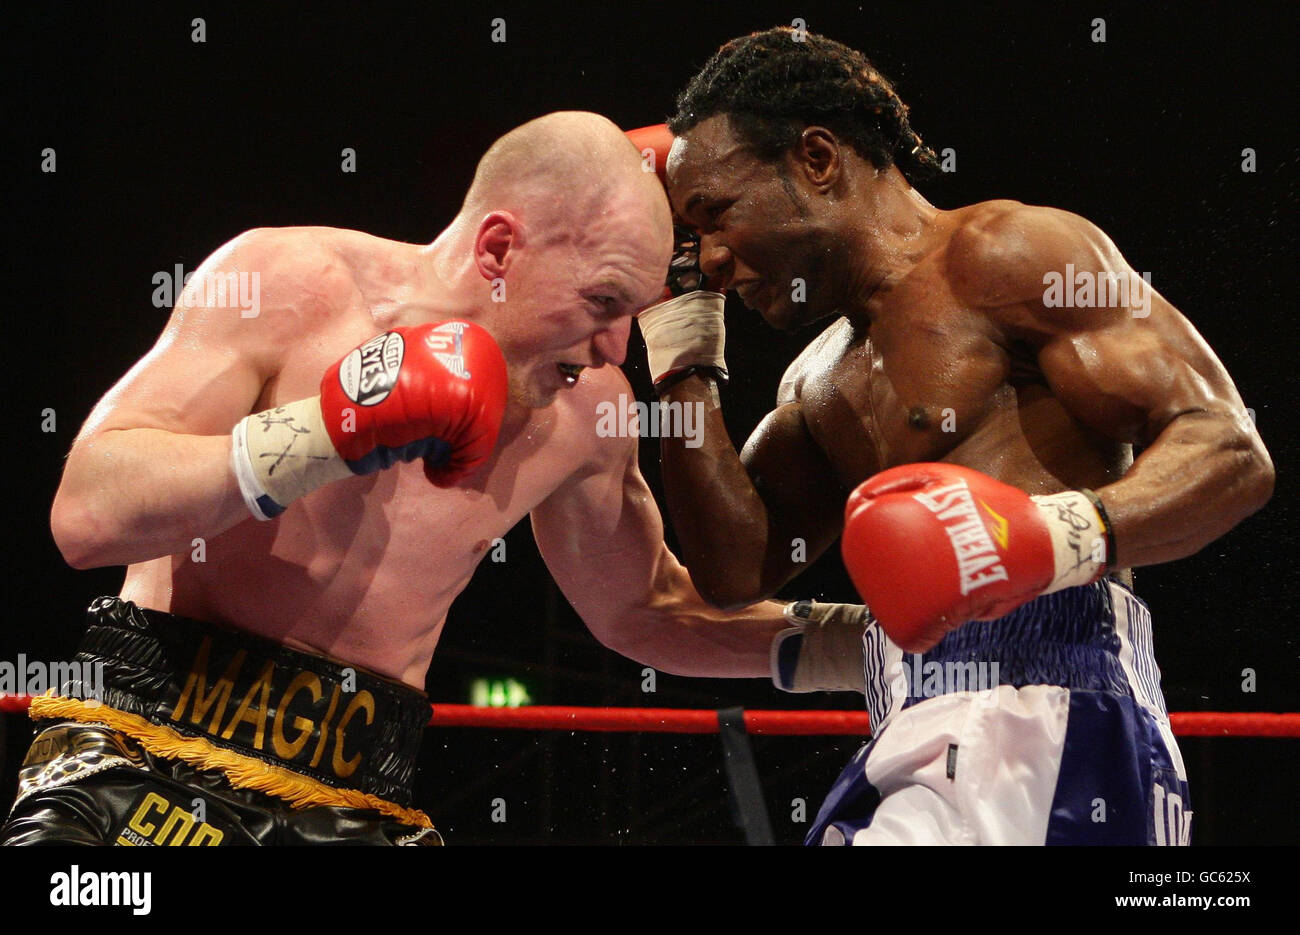 Matthew Hatton (left) in action against Lovemore N'Dou (right) during their IBO Welterweight Title fight at the Stoke on Trent. Stock Photo